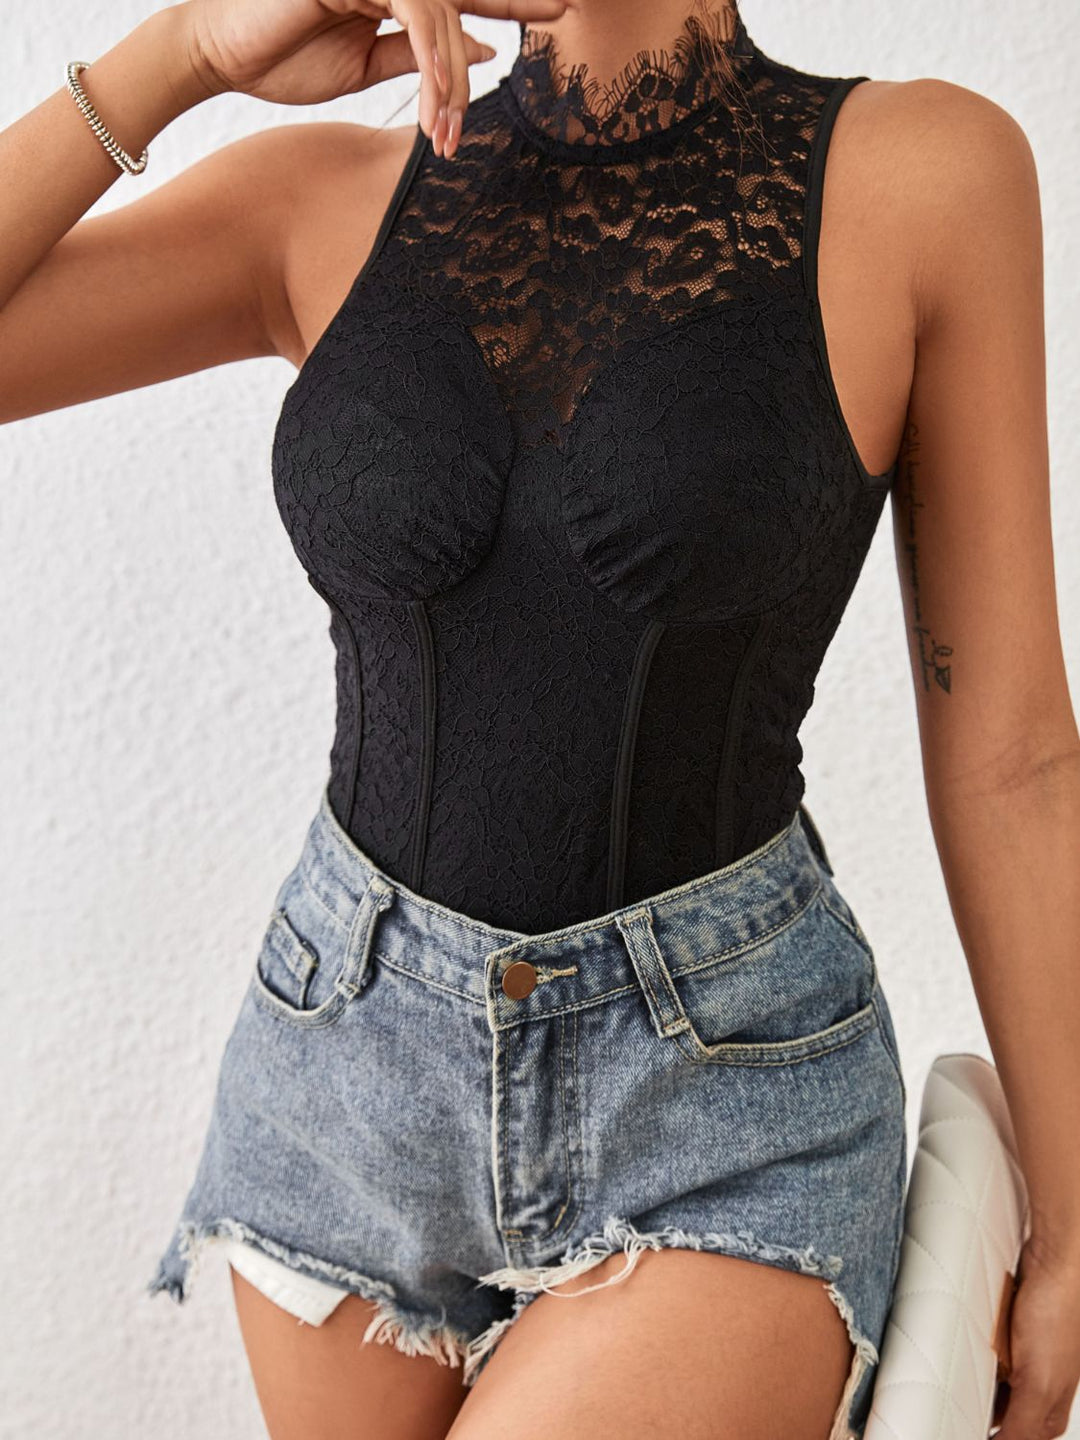 Reservations Lace Bodysuit - Cheeky Chic Boutique